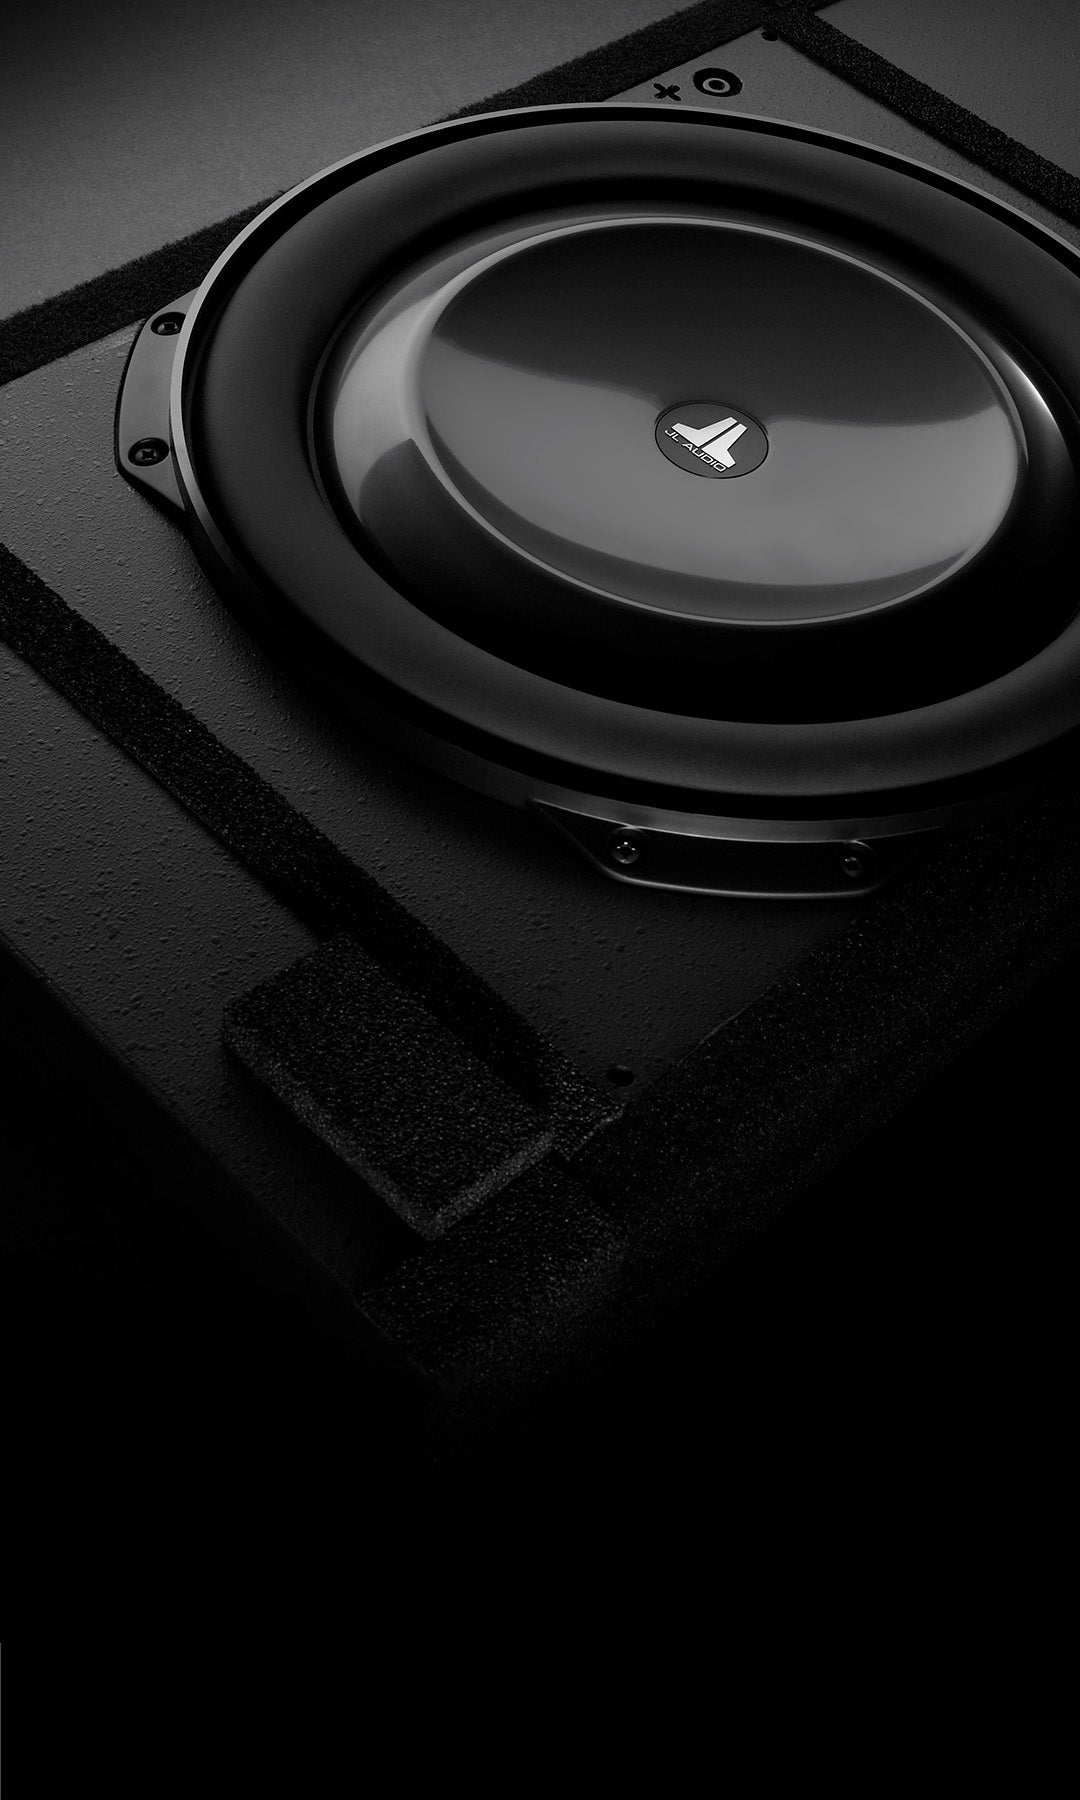 Close-up view of TW5v2 driver used in JL Audio IWS 13 subwoofer units in dark sleek setting.